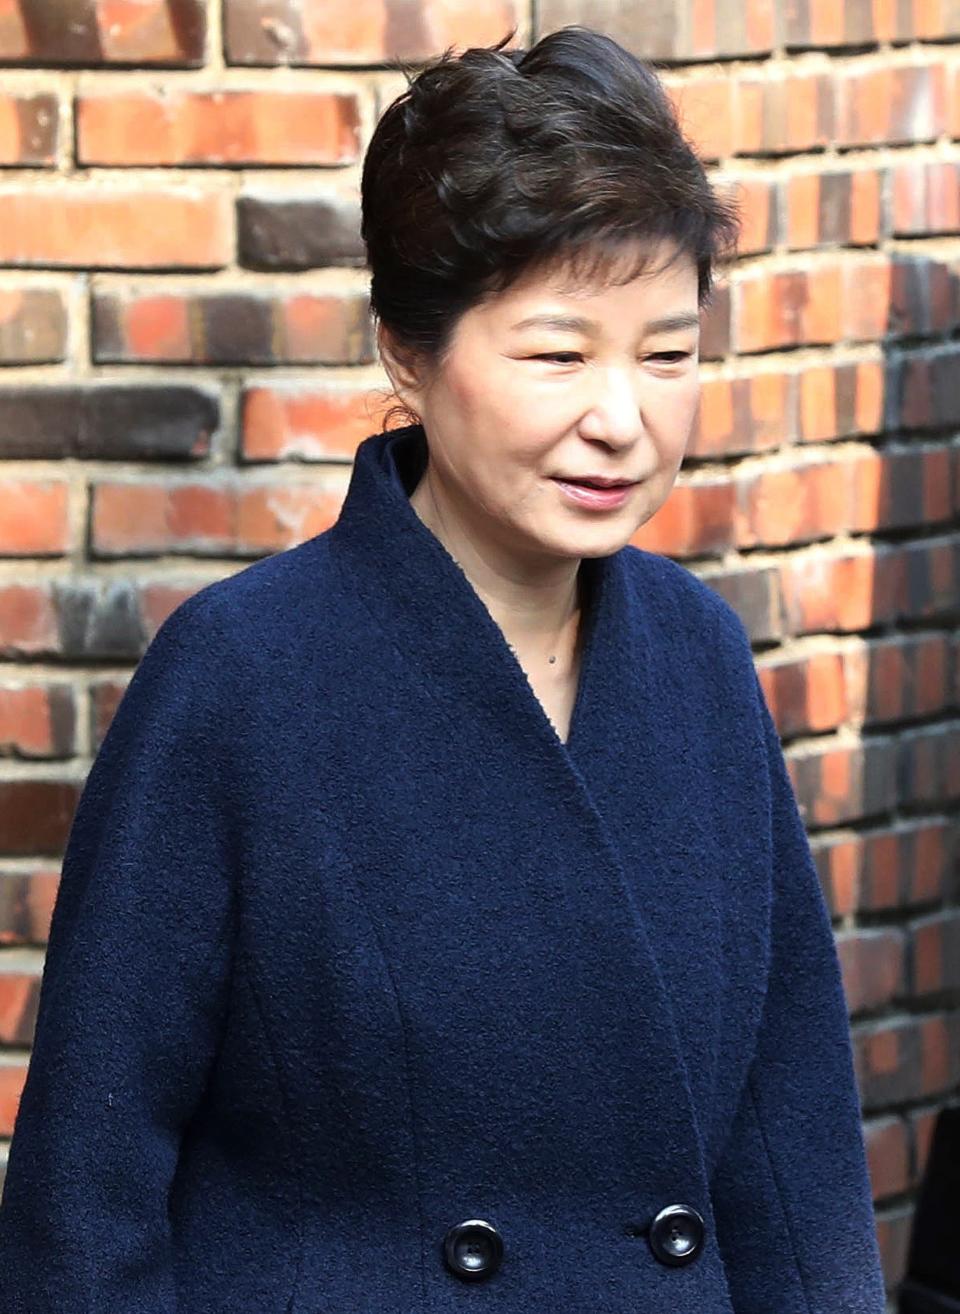 South Korean ousted President Park Geun-hye leaves from her private home to prosecutors office in Seoul, South Korea, Tuesday, March 21, 2017. (Kim Hyun-tae/Yonhap via AP)